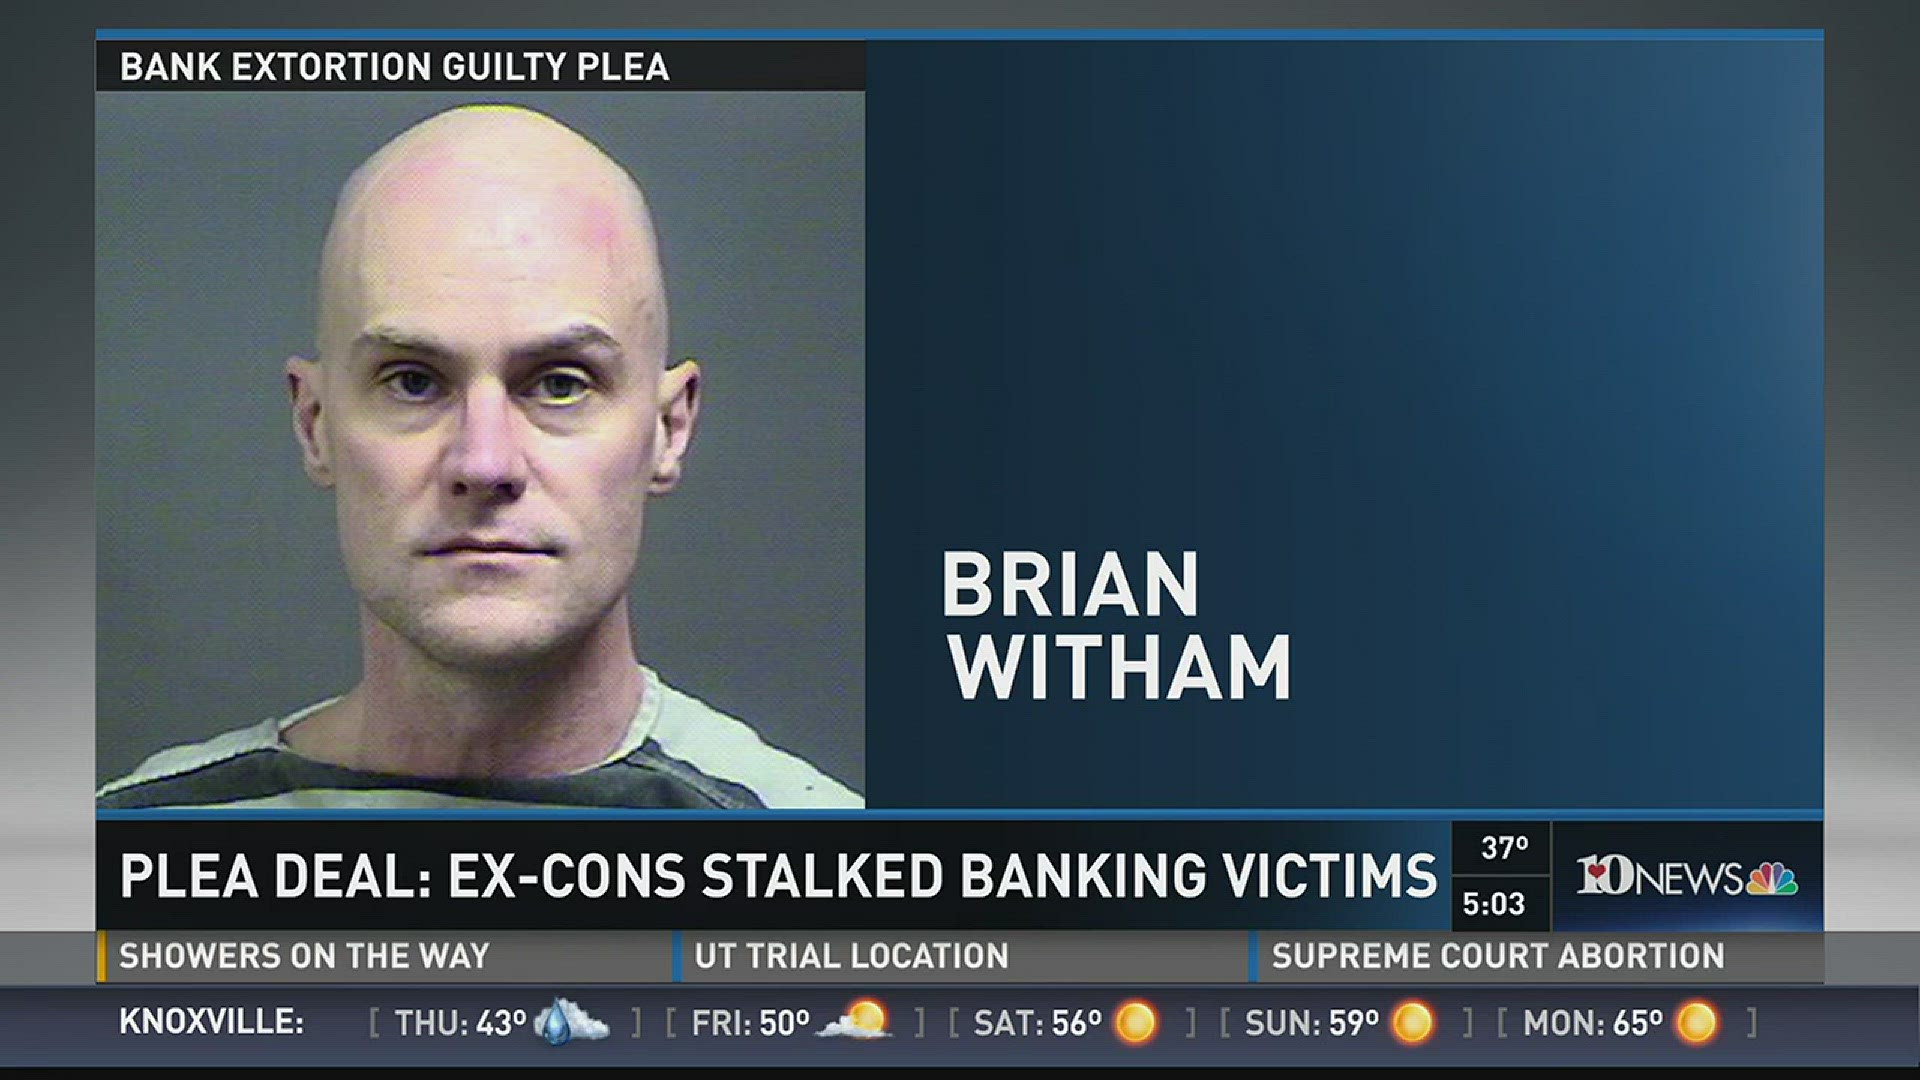 Details of the bank extortions and attempted extortions - including three in Tennessee in 2015 - emerged Tuesday in U.S. District Court in Knoxville, when Brian Scott Witham pleaded guilty to a series of holdups and other violent crimes